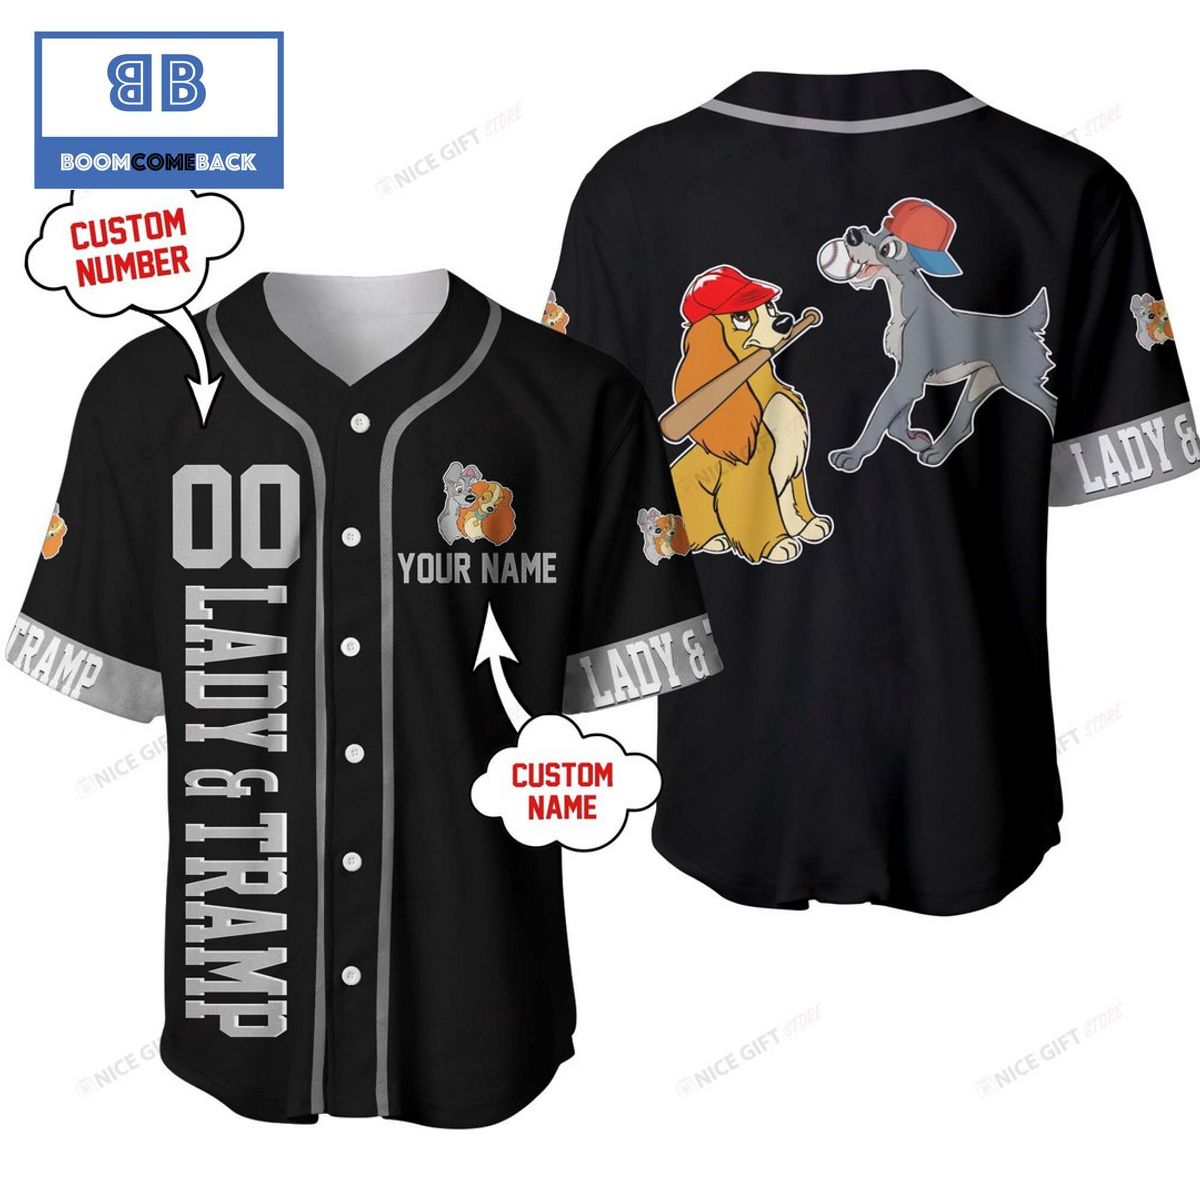 Personalized Lady And The Tramp Black And Grey Baseball Jersey